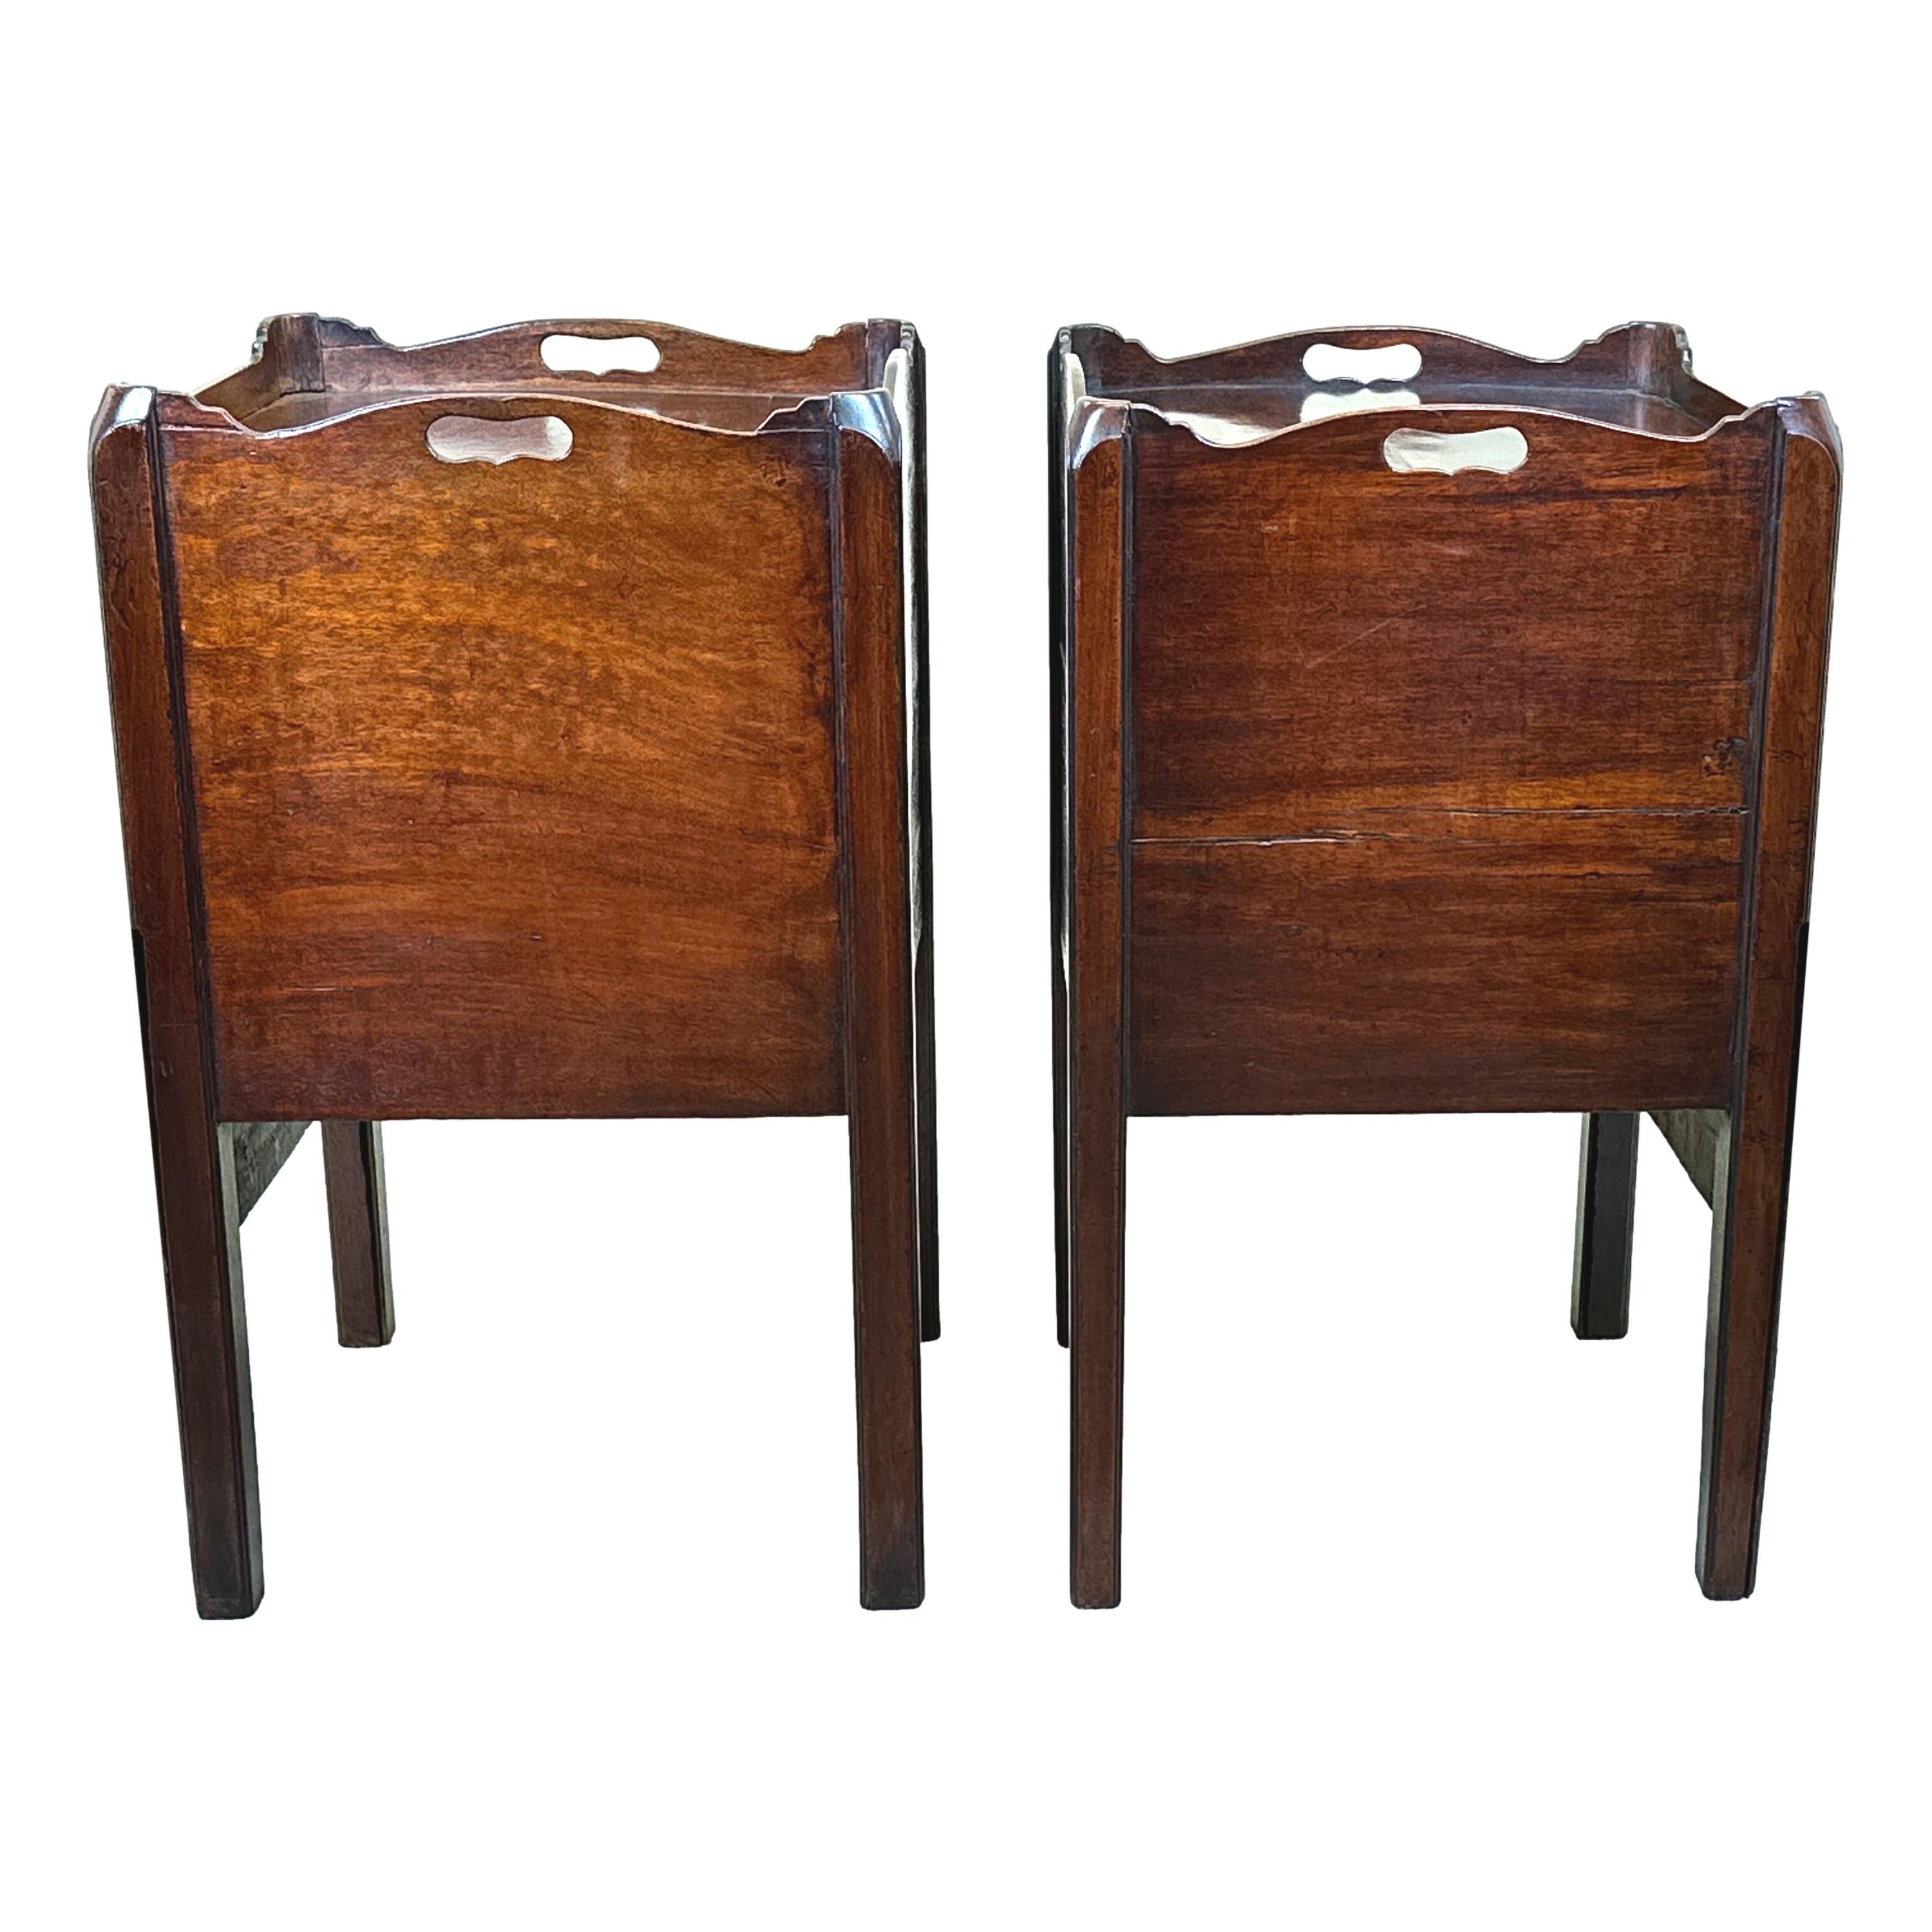 

A Good Quality And Well Matched Pair Of Late 18th Century, Mahogany, Georgian Bedside Night Tables, Or Tray Top Commodes, Having Elegant Shaped Gallery Tops Over Pair Of Well Figured Doors With Attractive Strung Decoration And Converted Pull Out